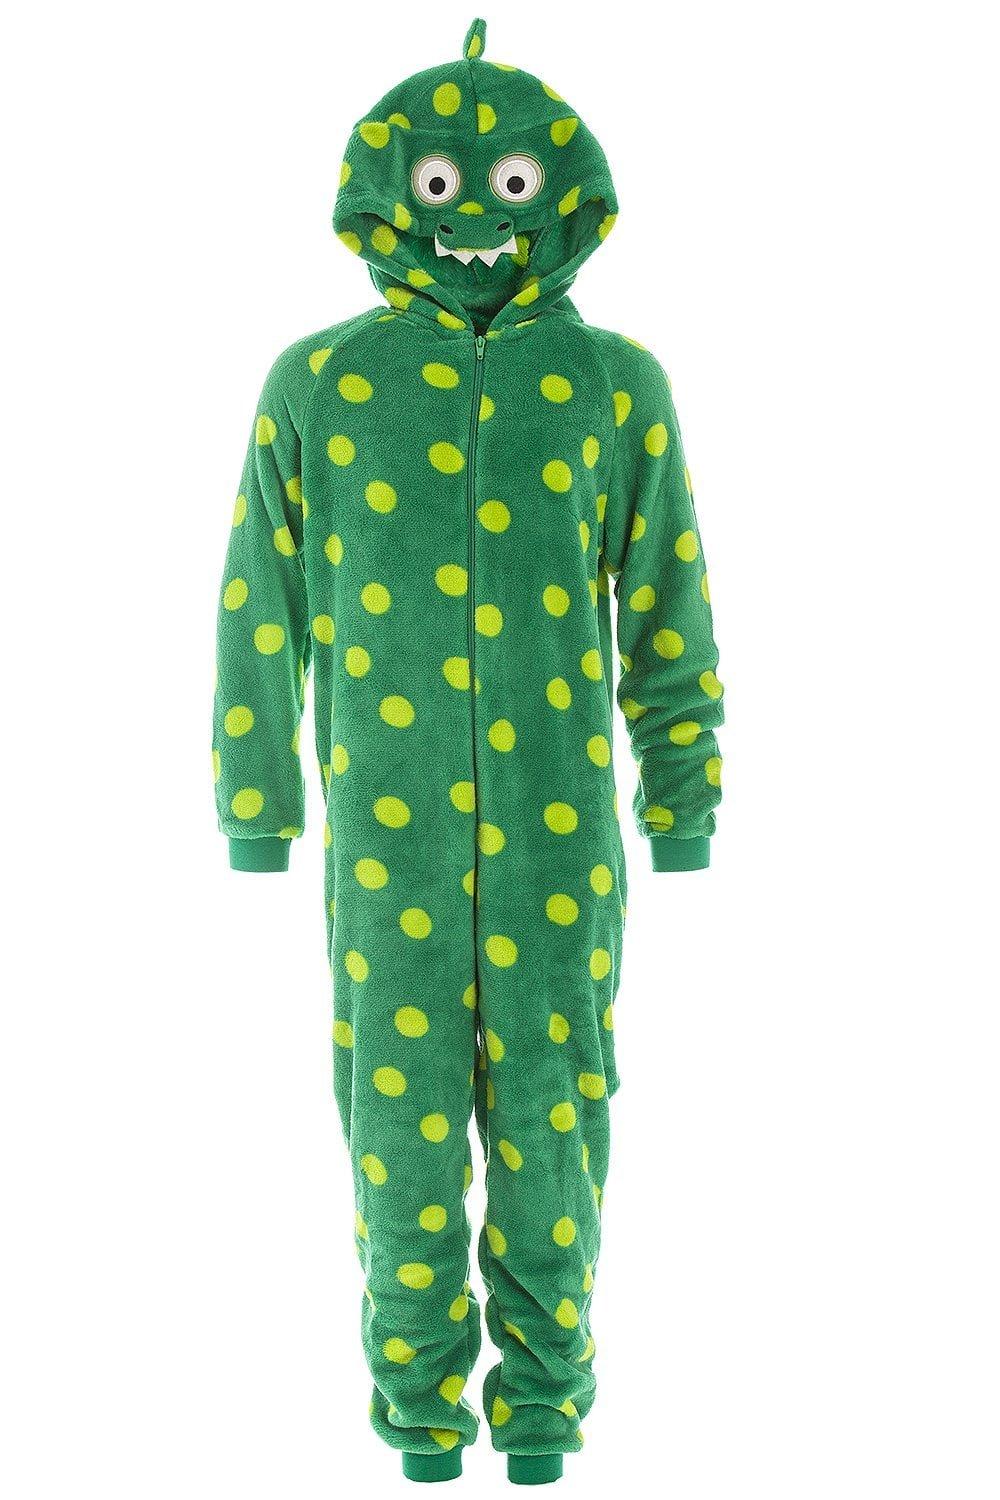 Supersoft Dragon Polka Dot Hooded All In One Onesie